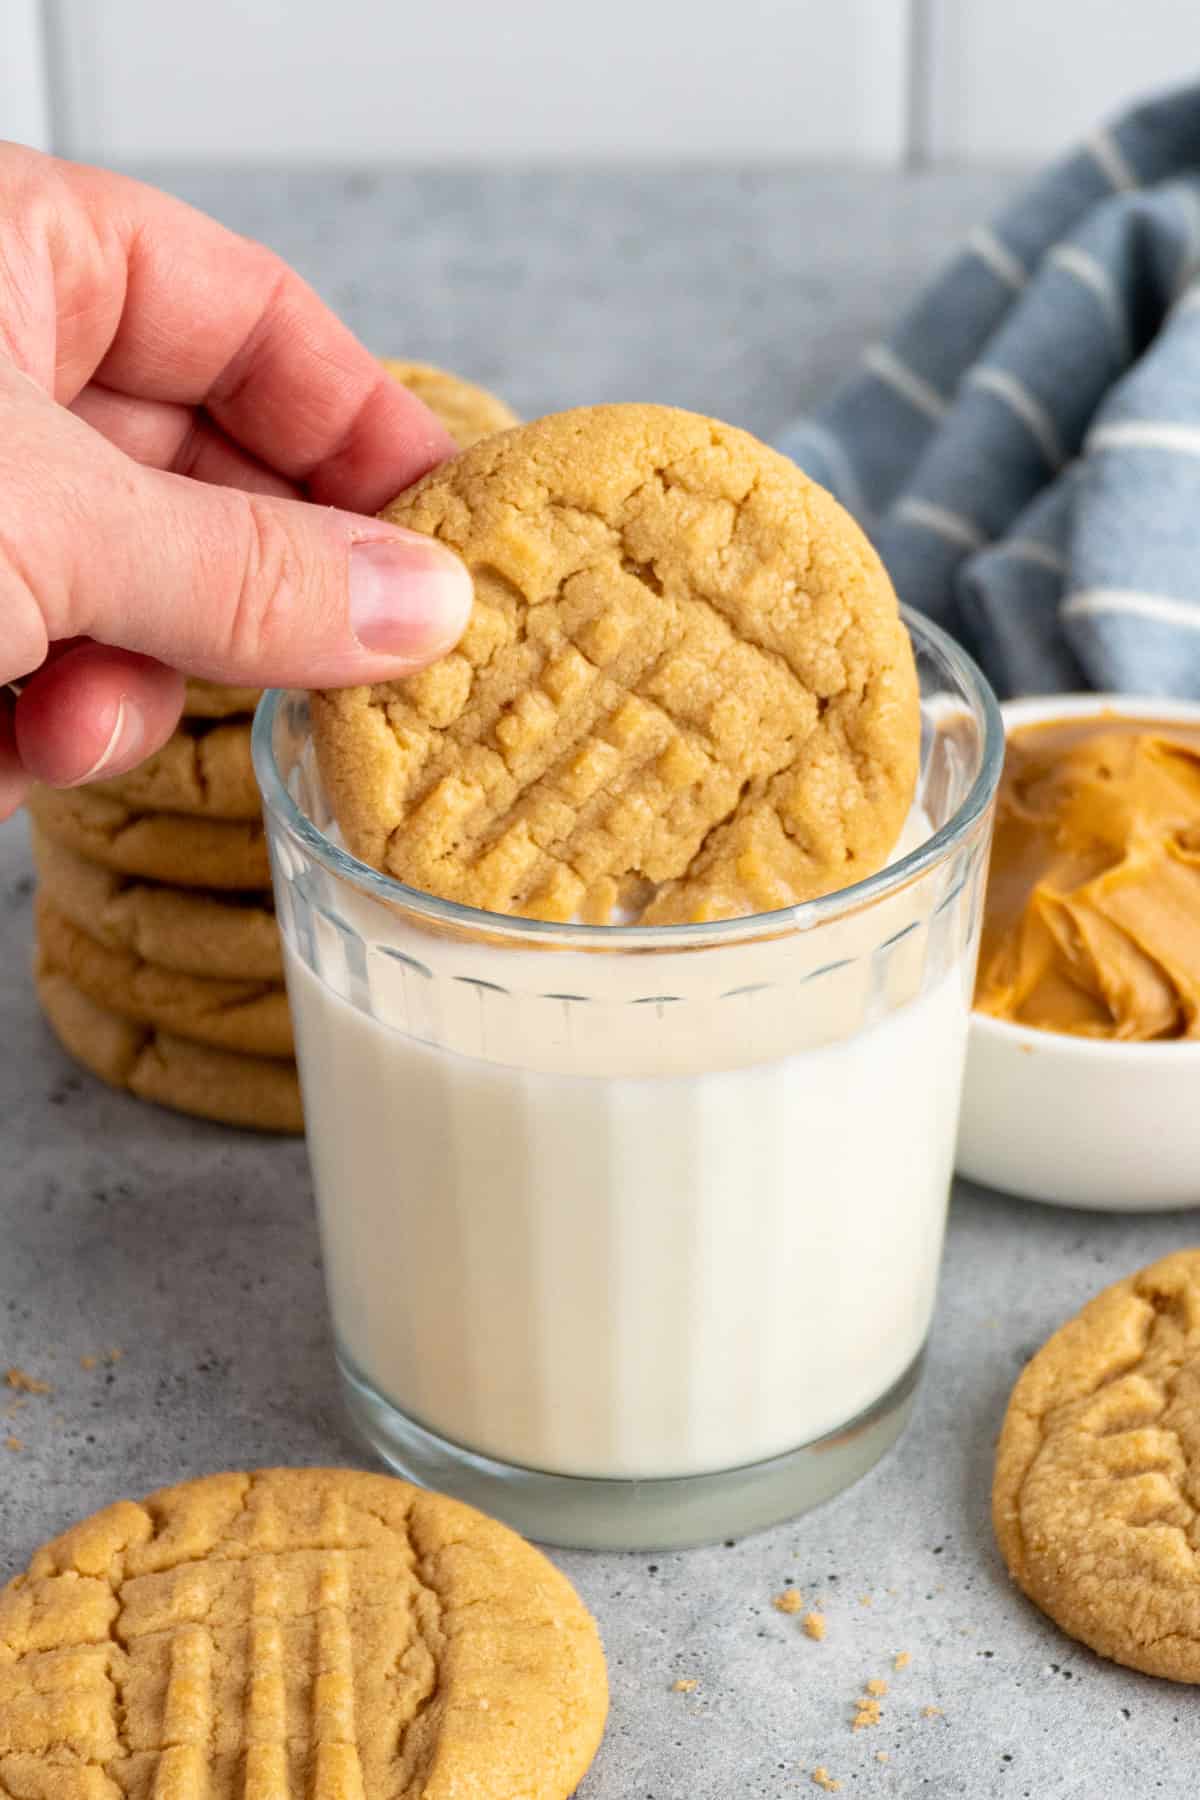 A hand dipping a peanut butter cookie in a glass of milk.